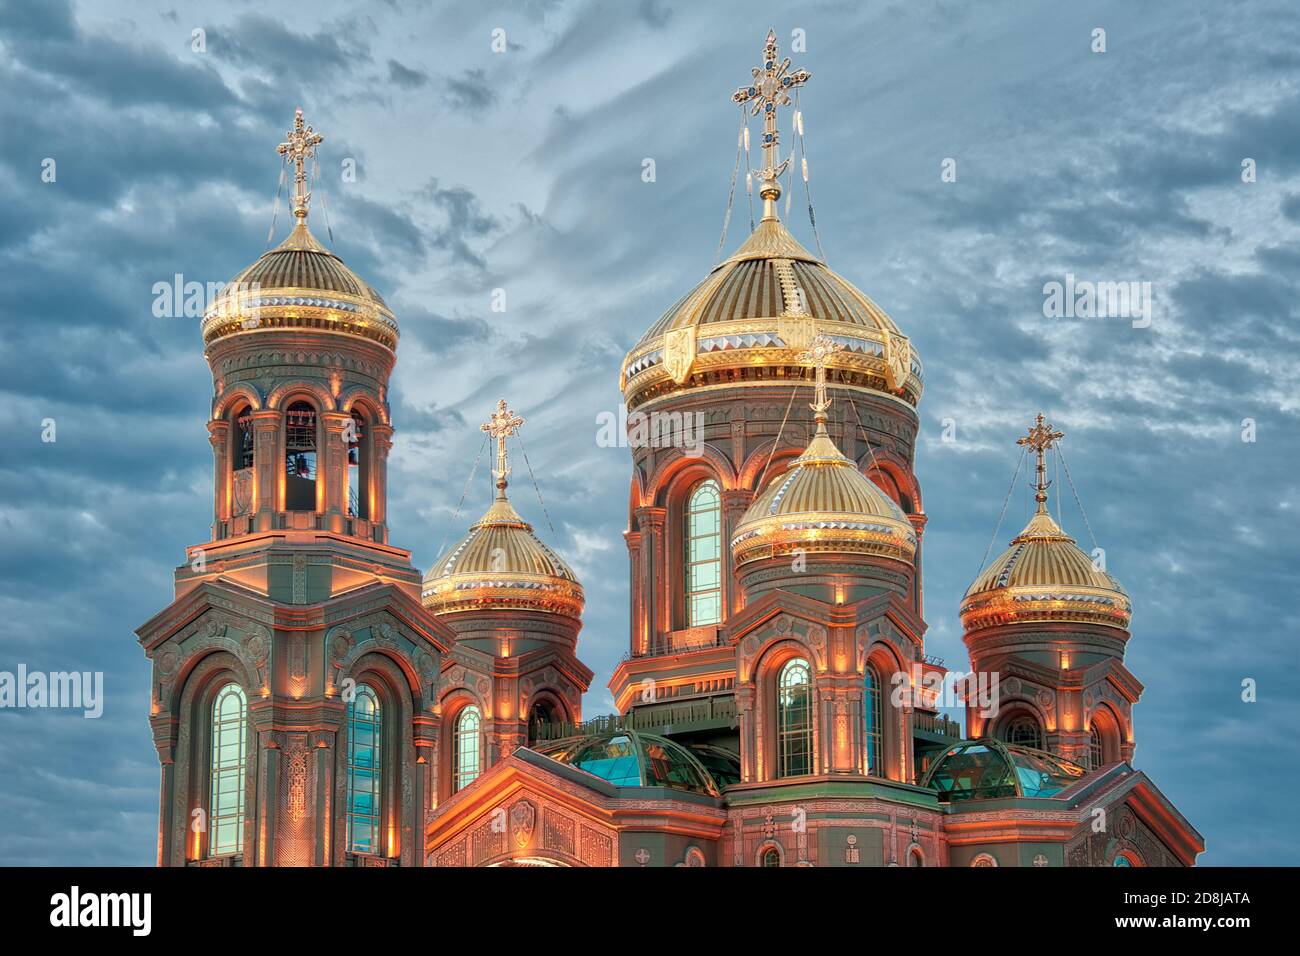 = Illuminated Domes of the Resurrection Cathedral in Twilight =  Shining gold domes (cupolas) of the Resurrection Cathedral, the Main Church of the Ru Stock Photo